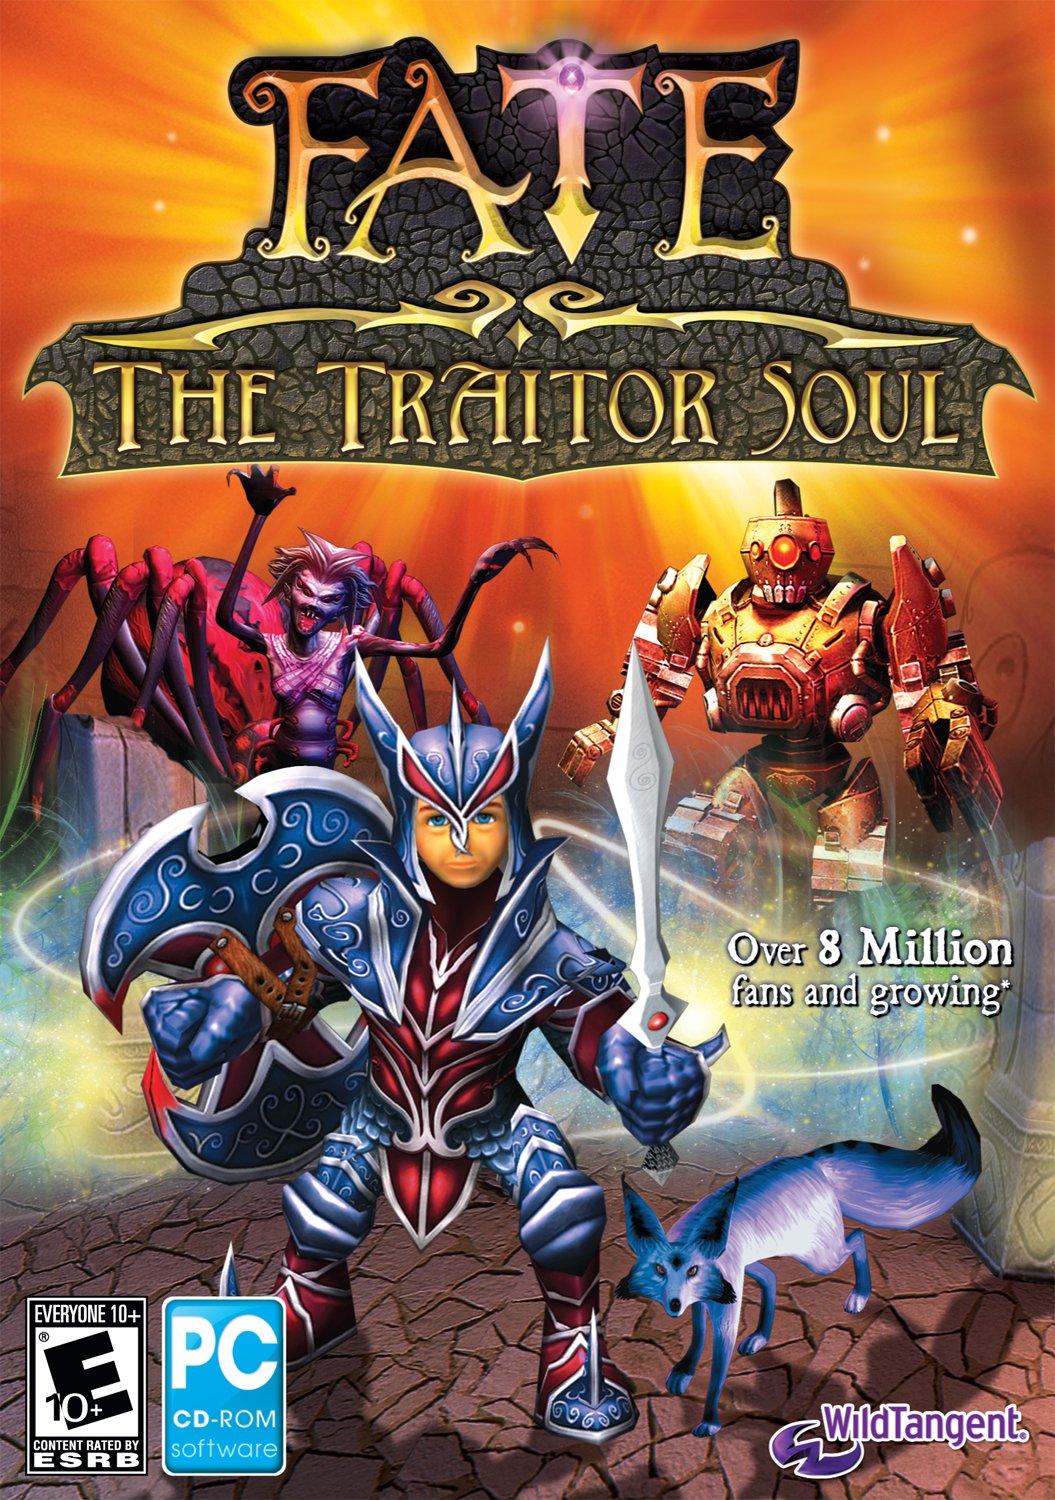 Image of Fate: The Traitor Soul